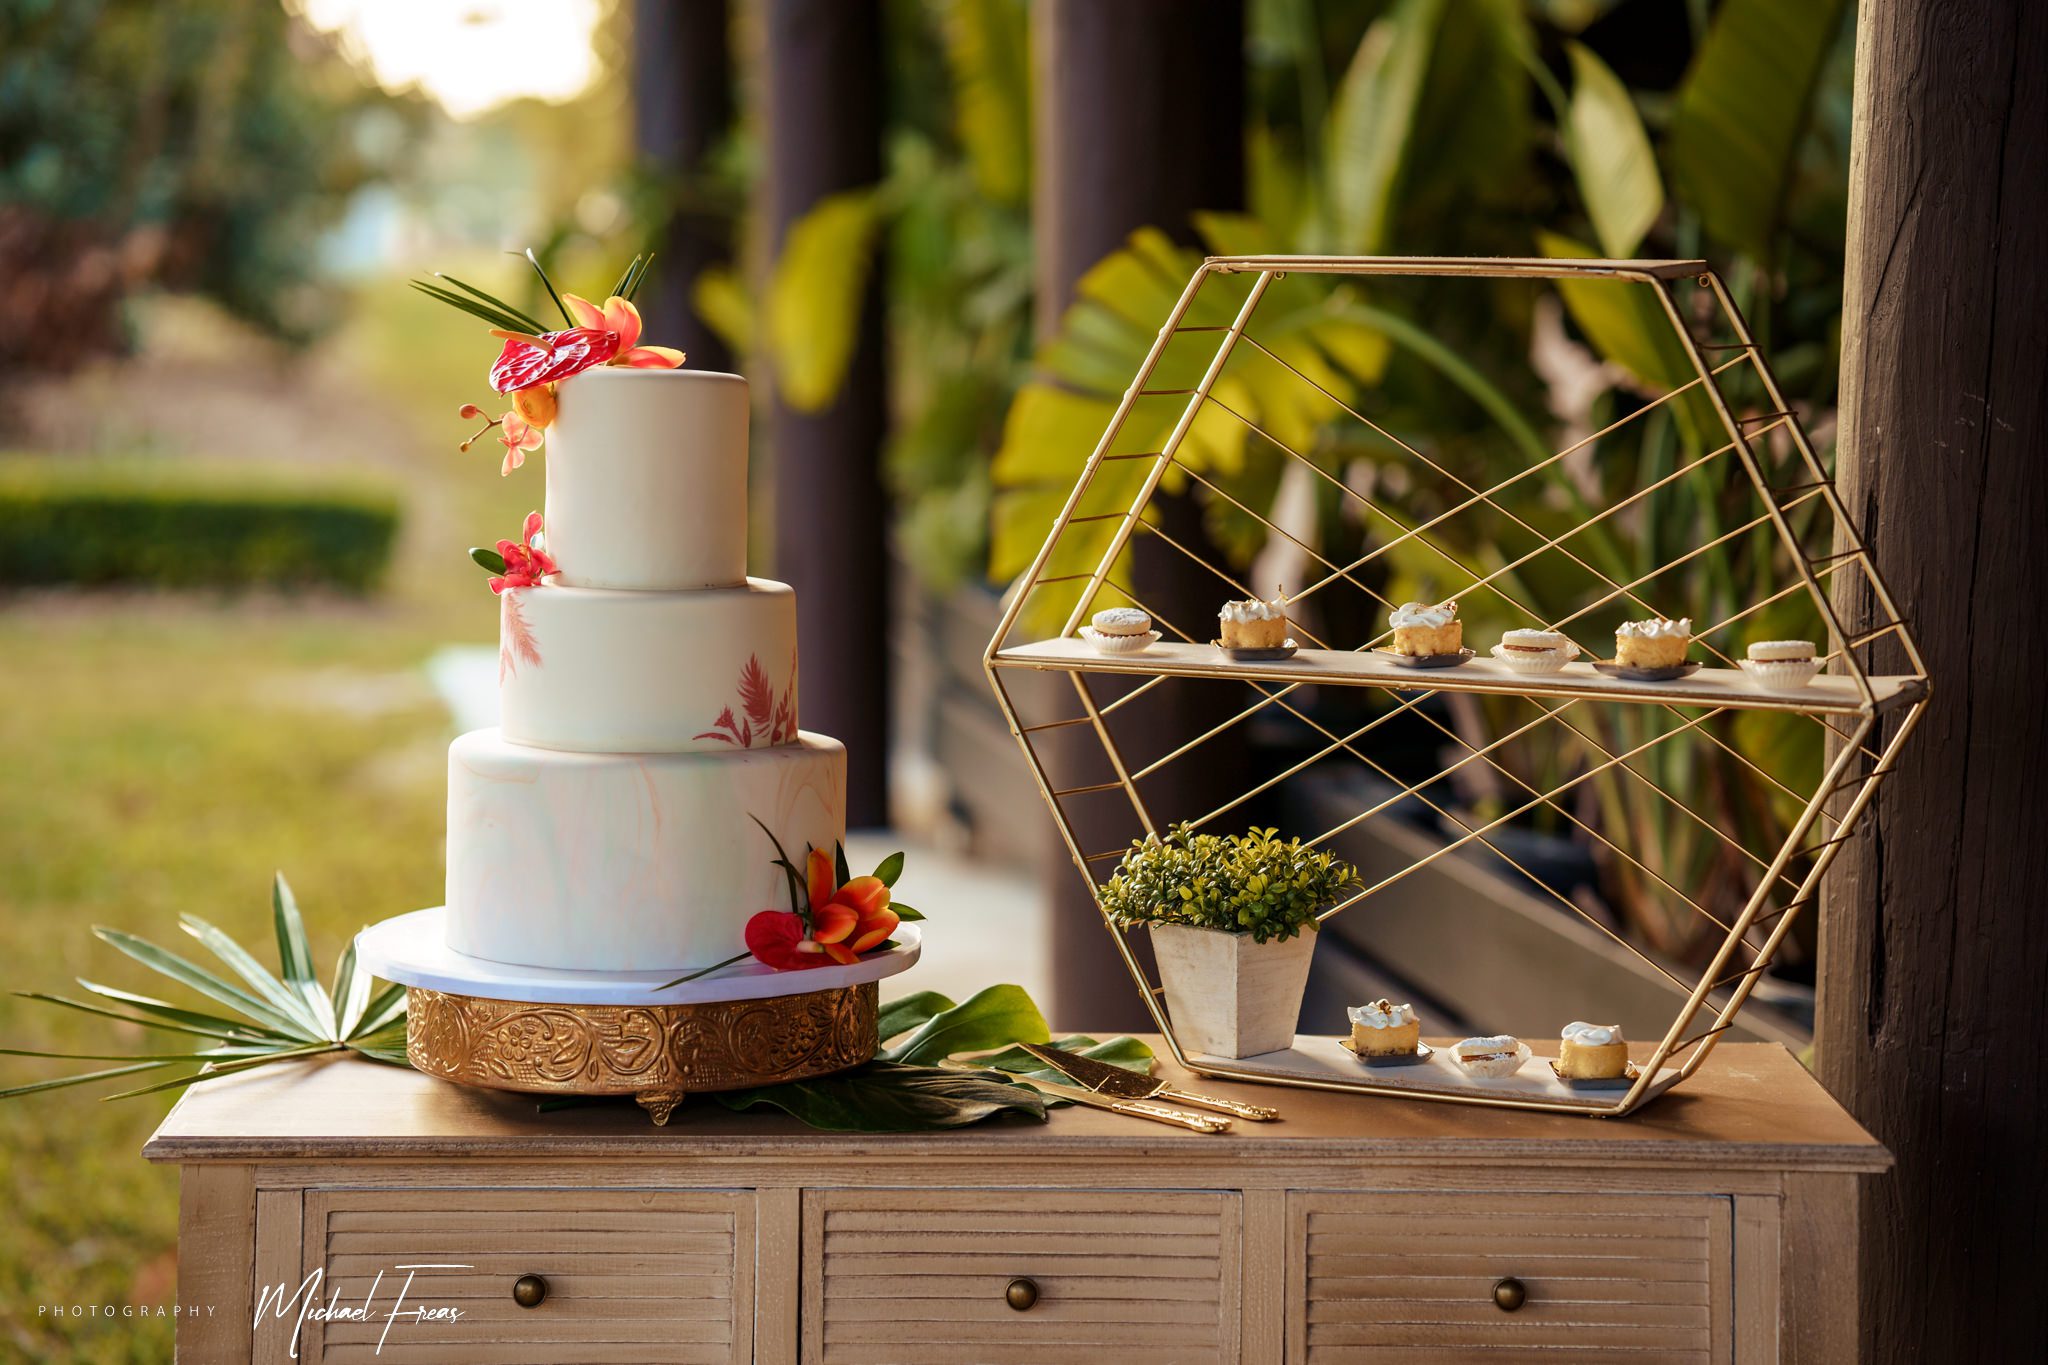 Photo of the desserts and wedding cake together